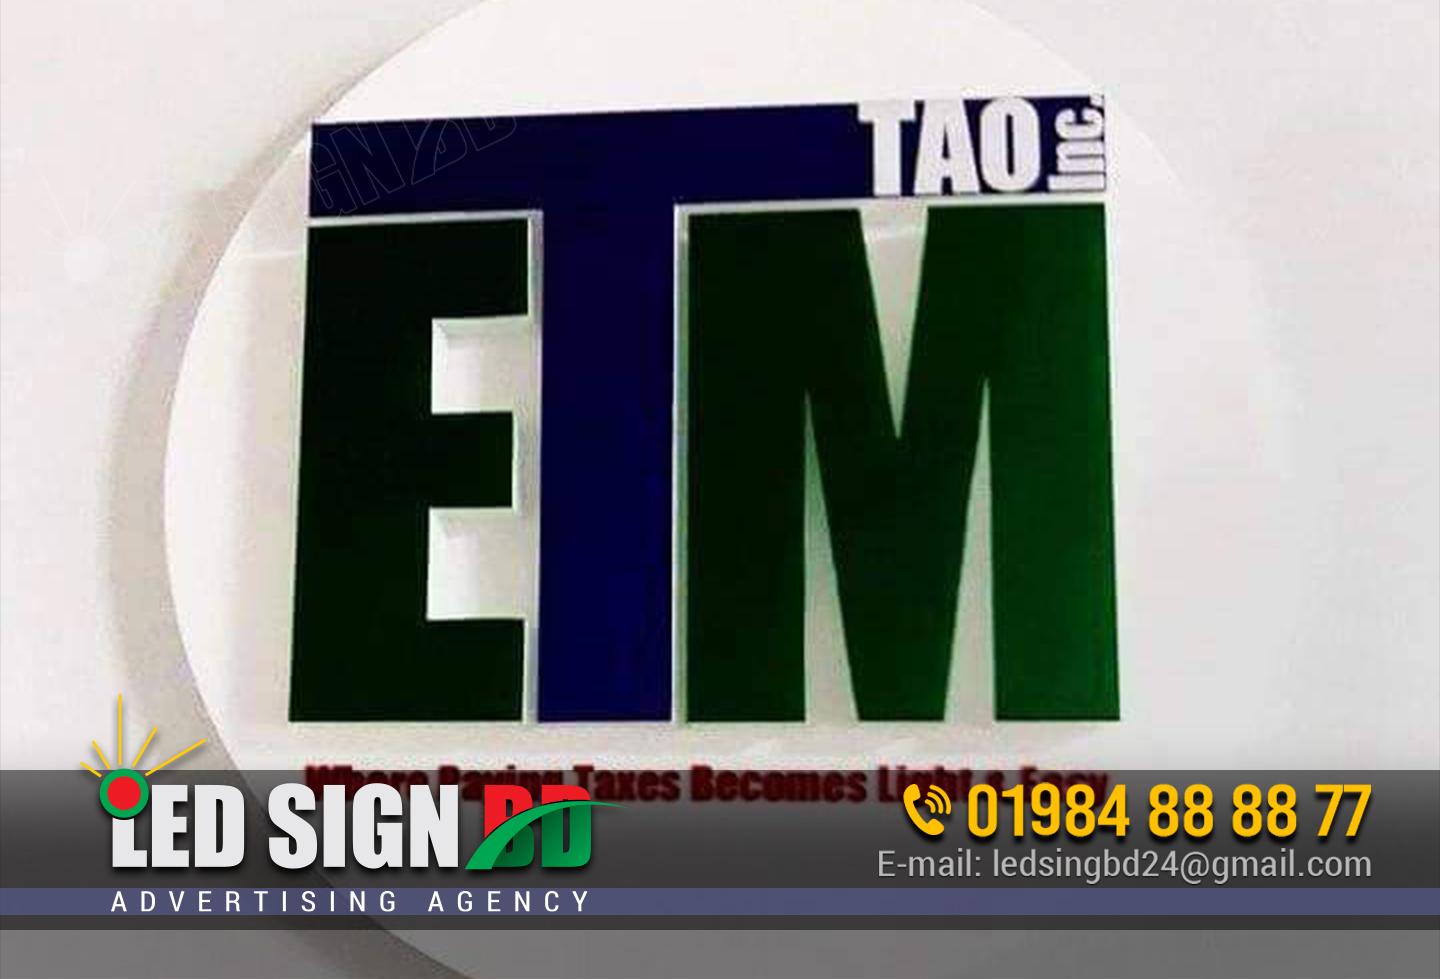 Acrylic Letters Price in Bangladesh, SS Letter bd, SS Top Letter Signage in Bangladesh, Pence boundary Signage in Dhaka Bangladesh.